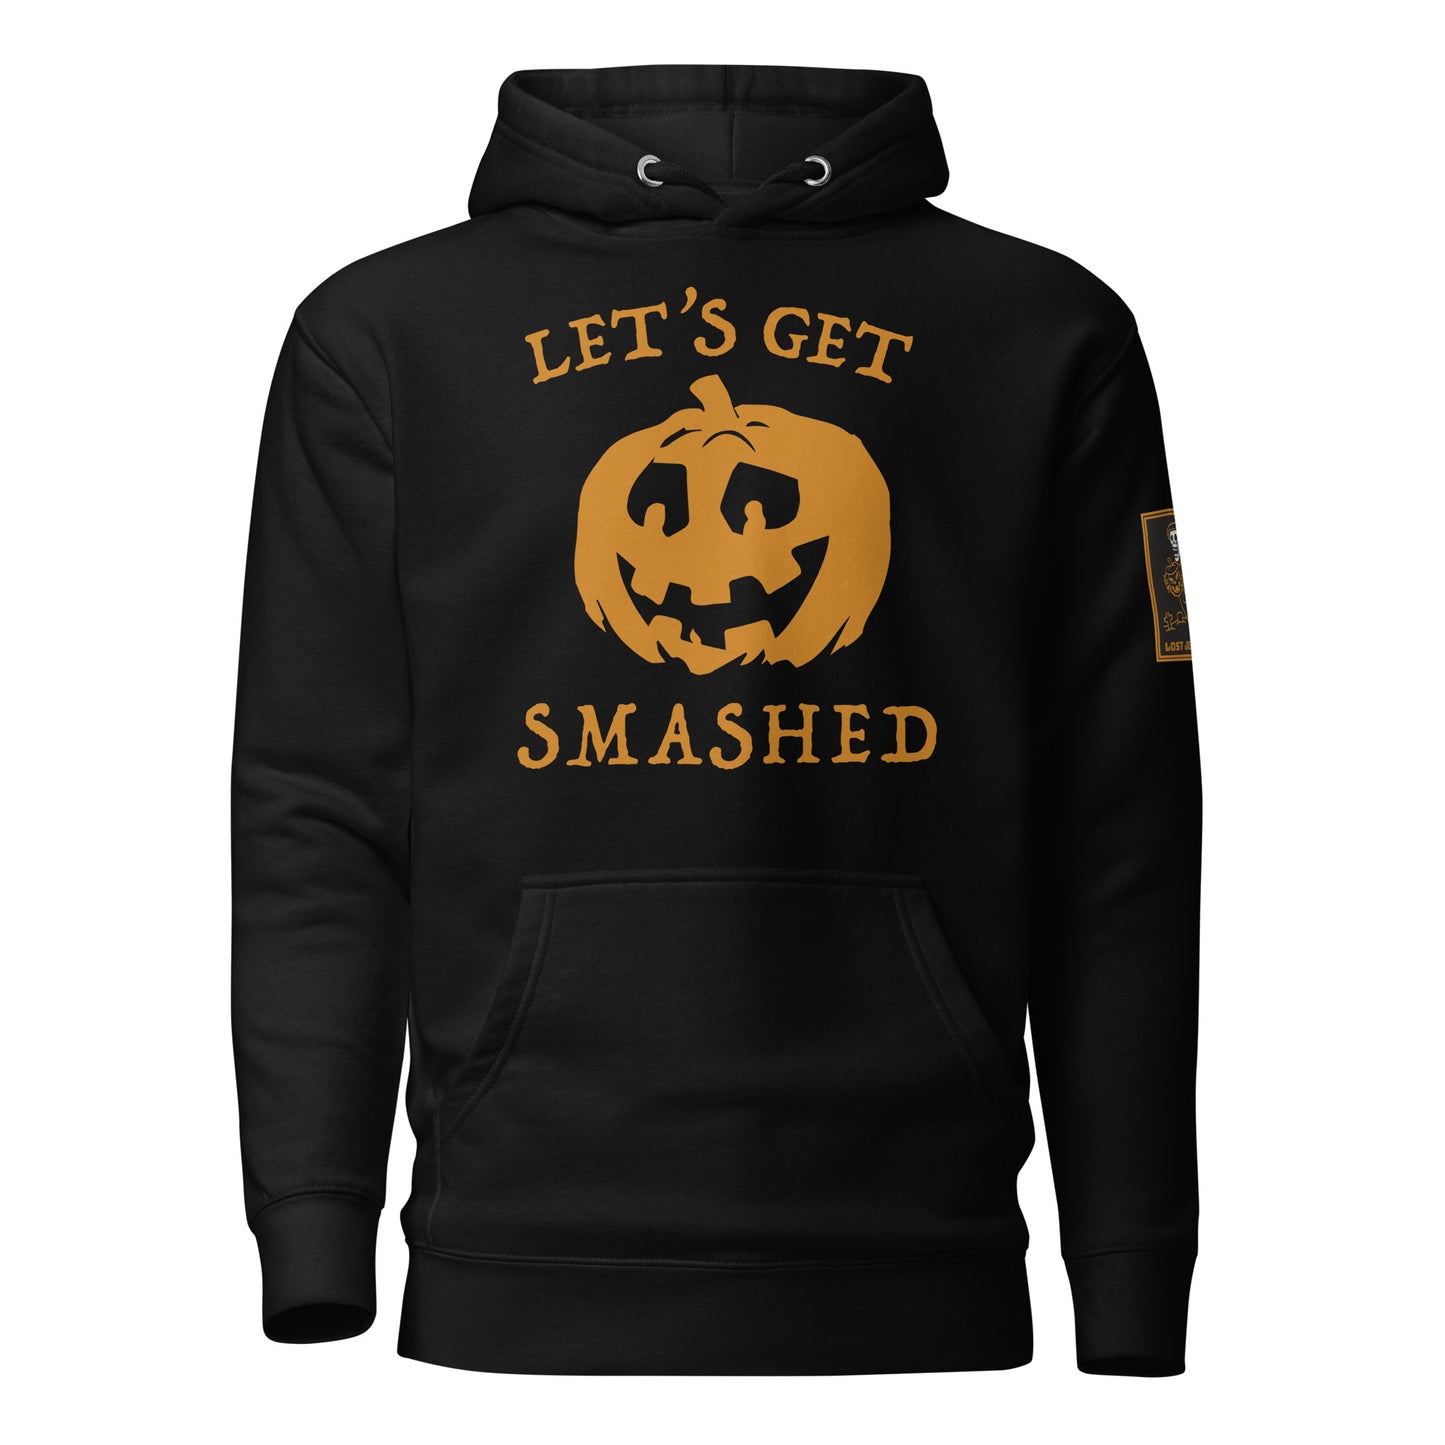 LET'S GET SMASHED - Unisex Hoodie